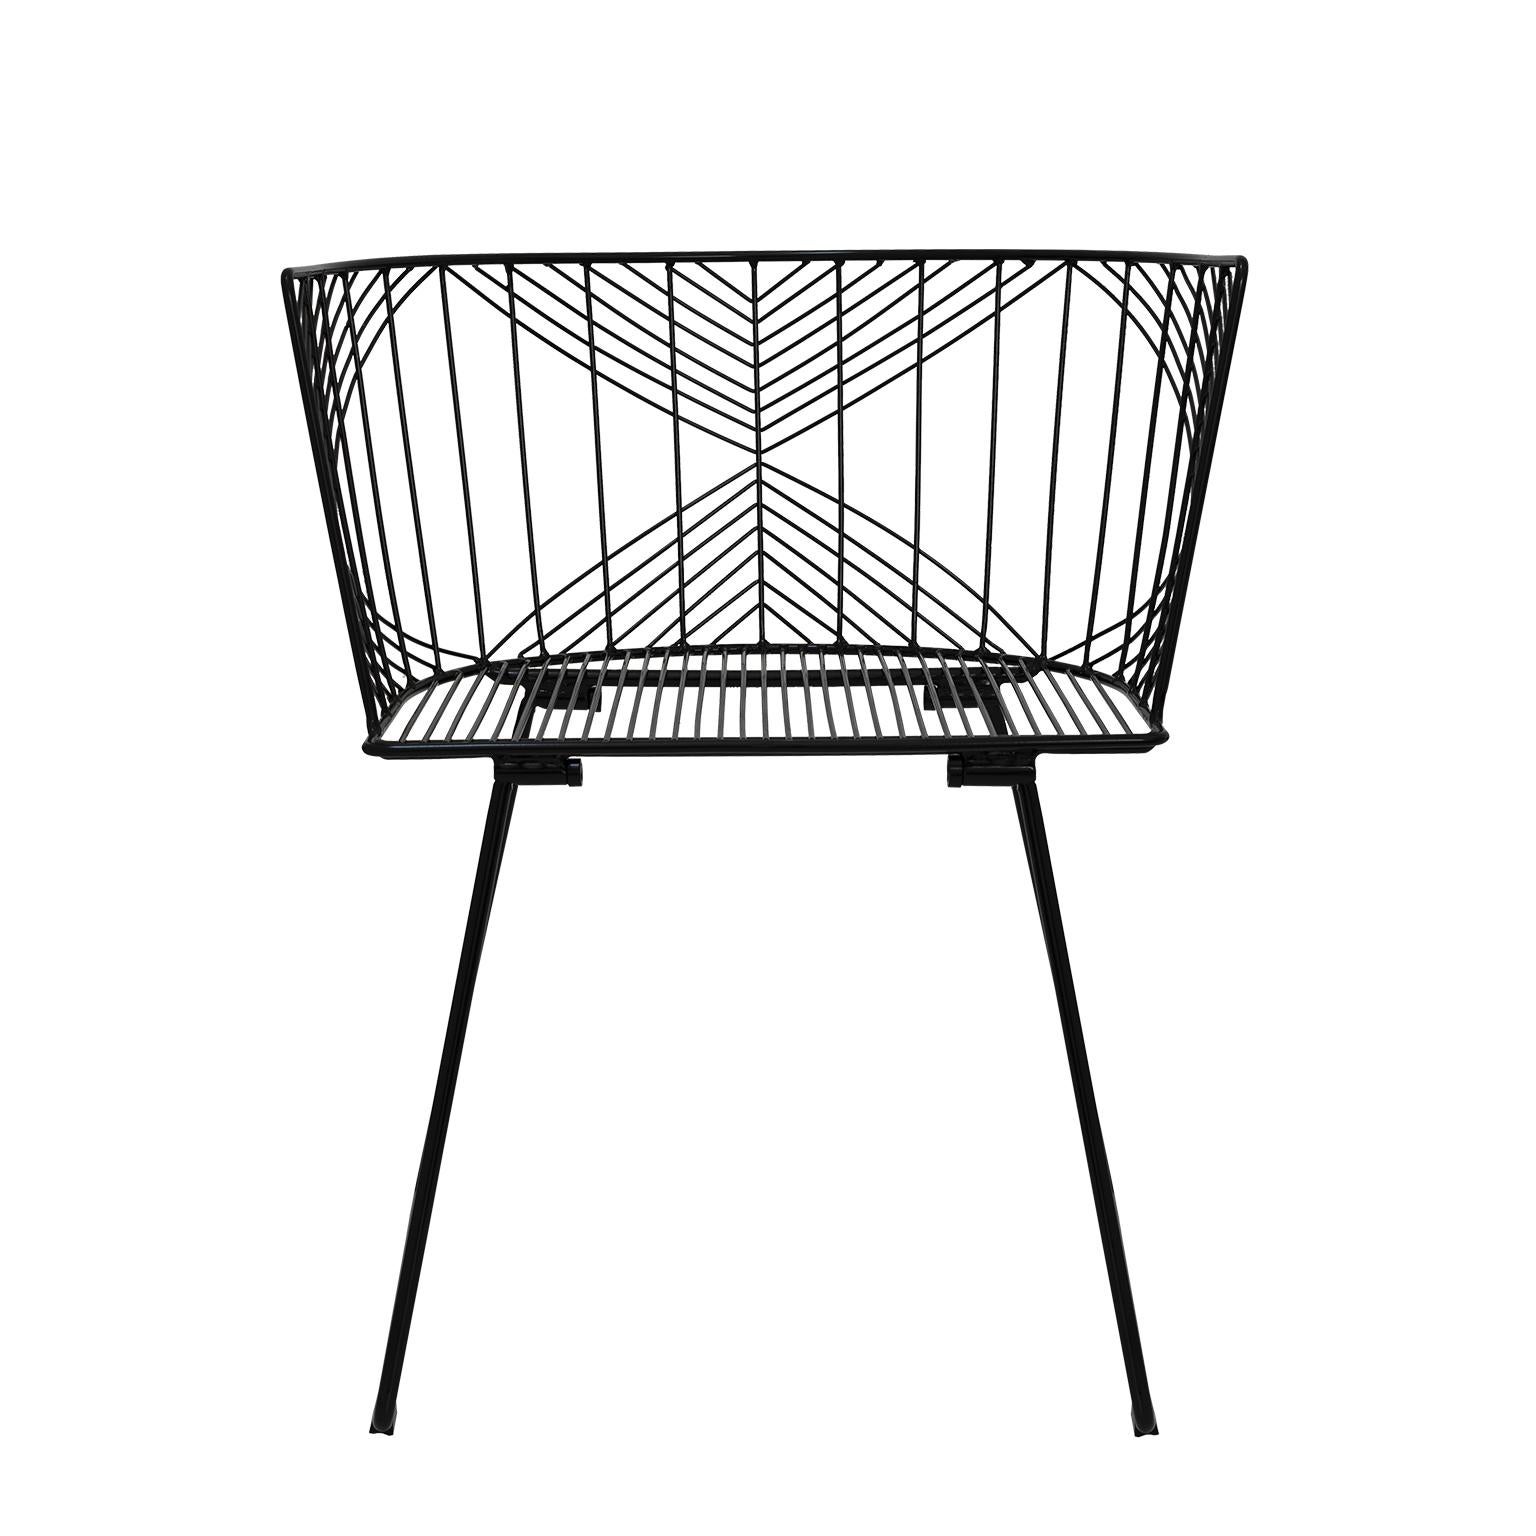 Bend Goods Wire Furniture
A Bend Goods original design, the captain chair is truly one of a kind. It has a generous seat for better maneuverability, making this the ideal wire chair for any dining experiences full of entertainment. The captain